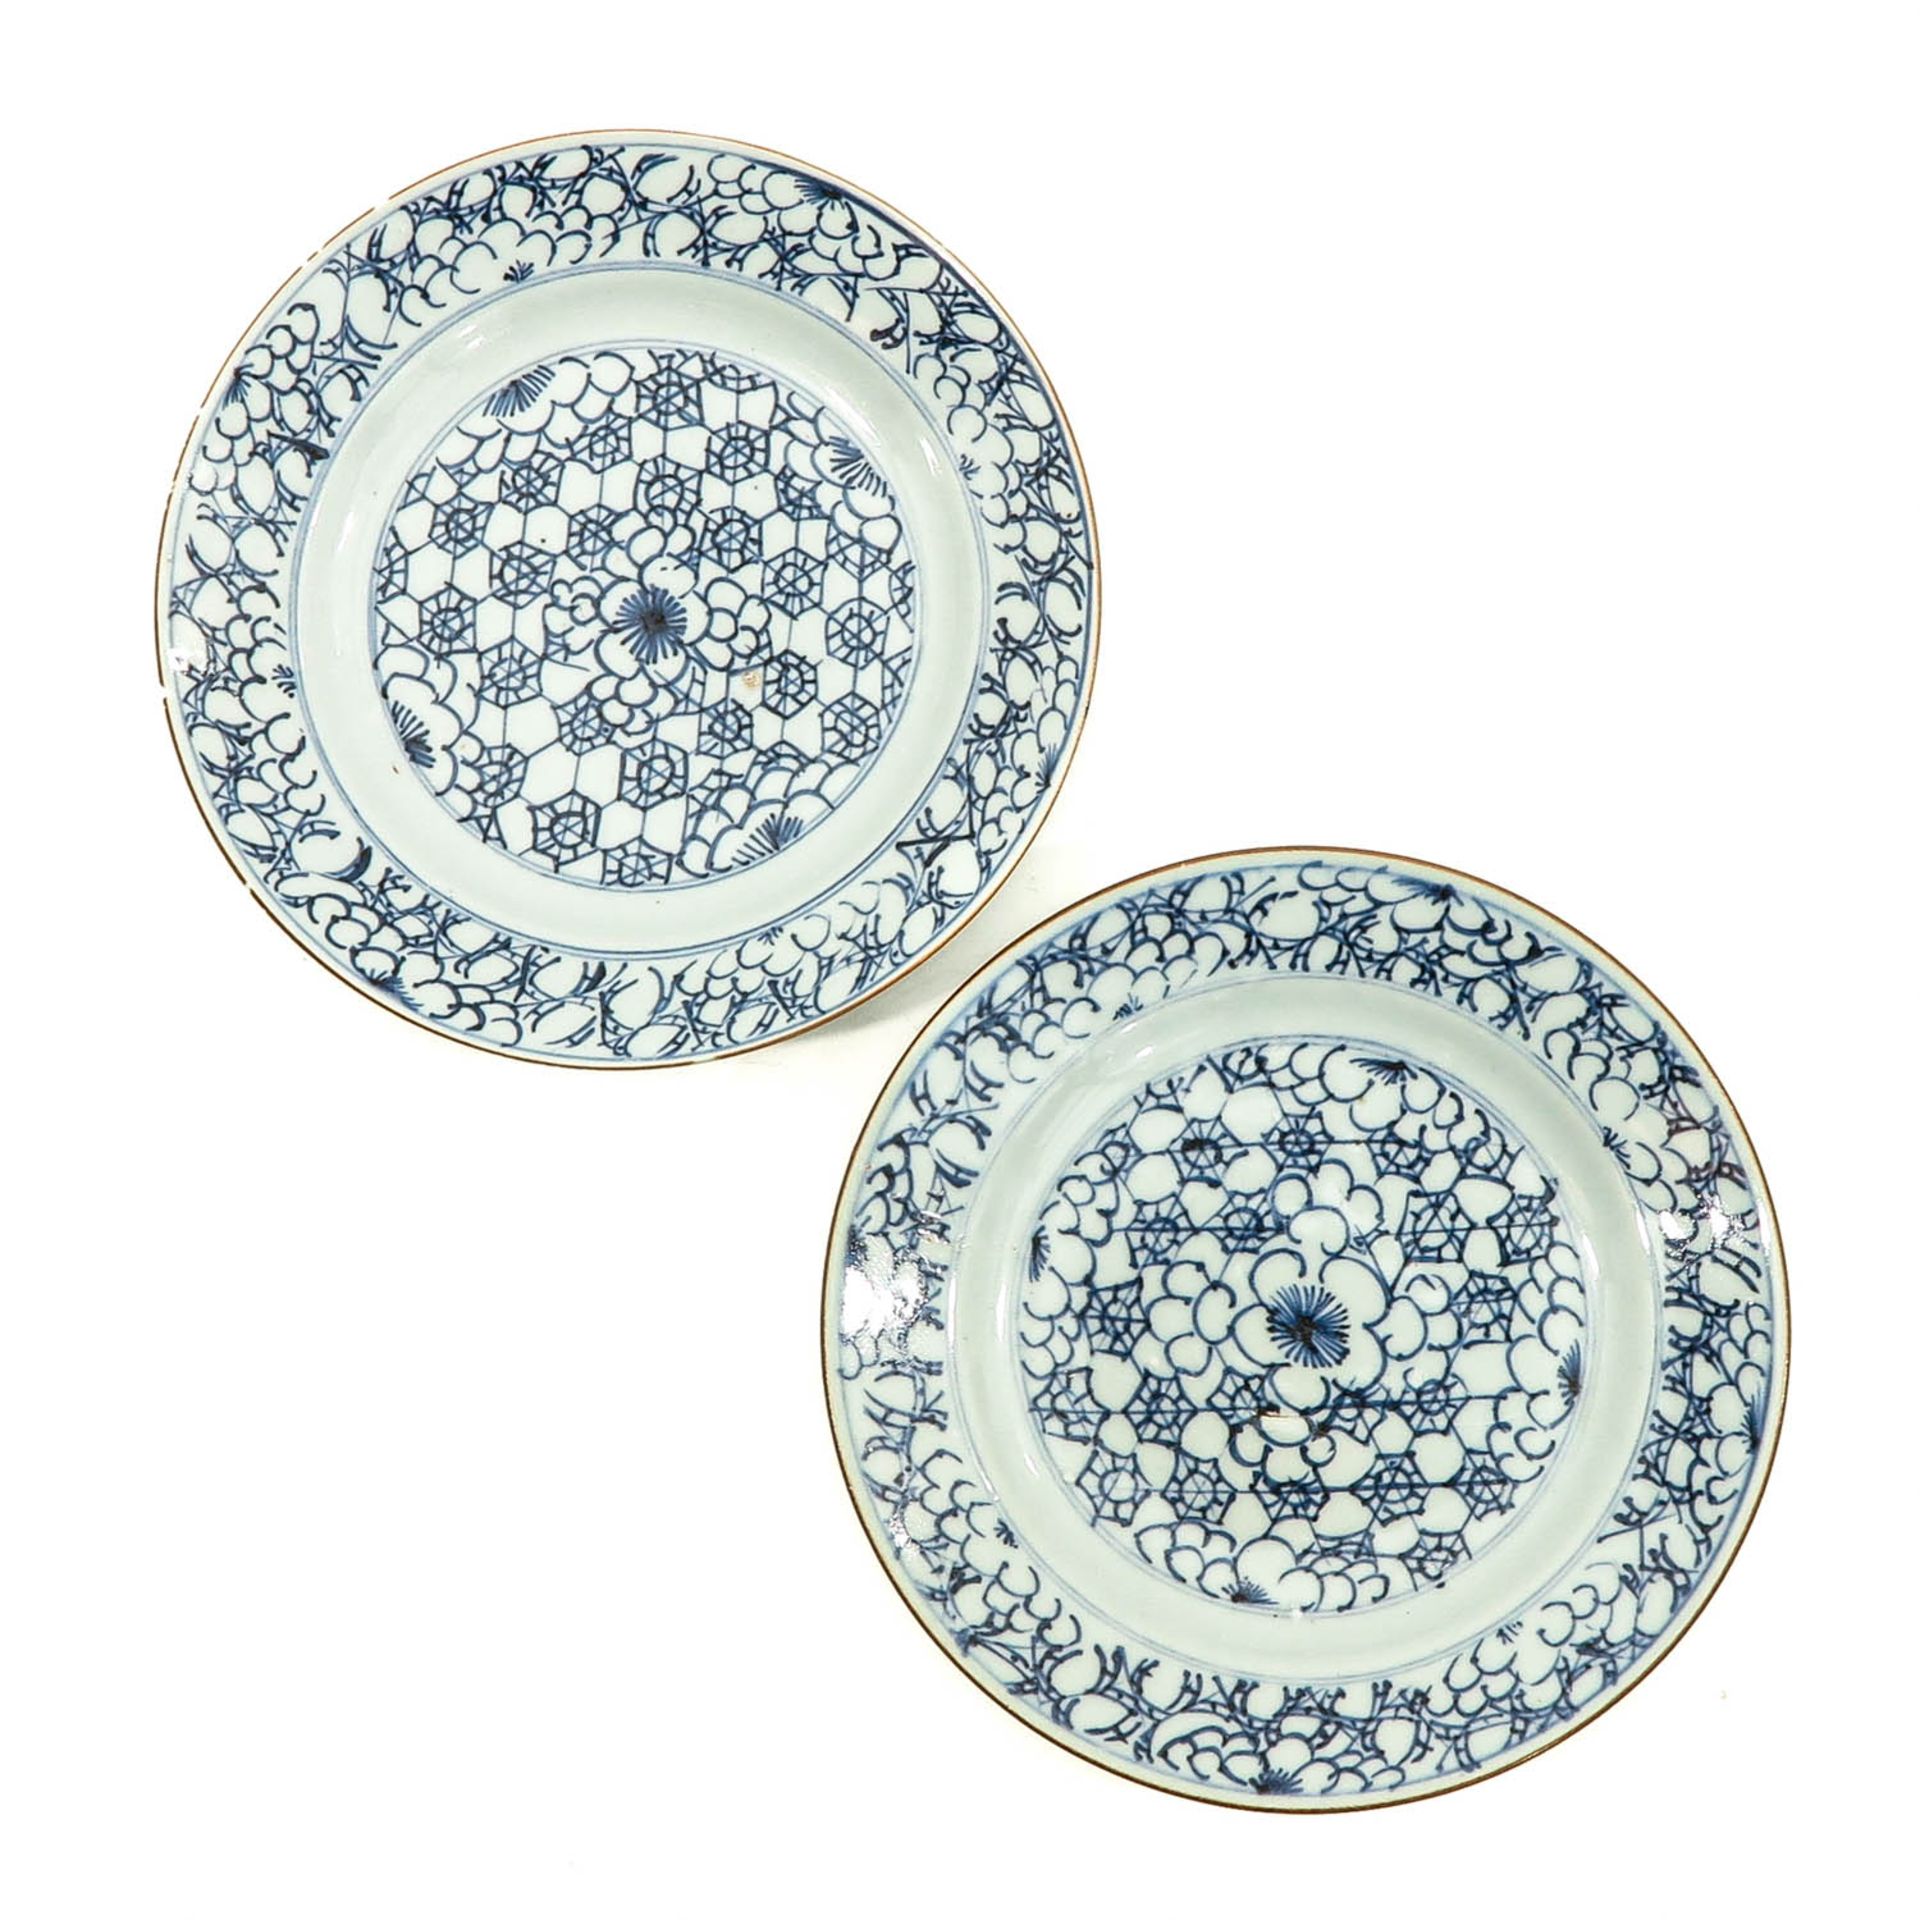 A Series of 6 Blue and White Plates - Image 5 of 10